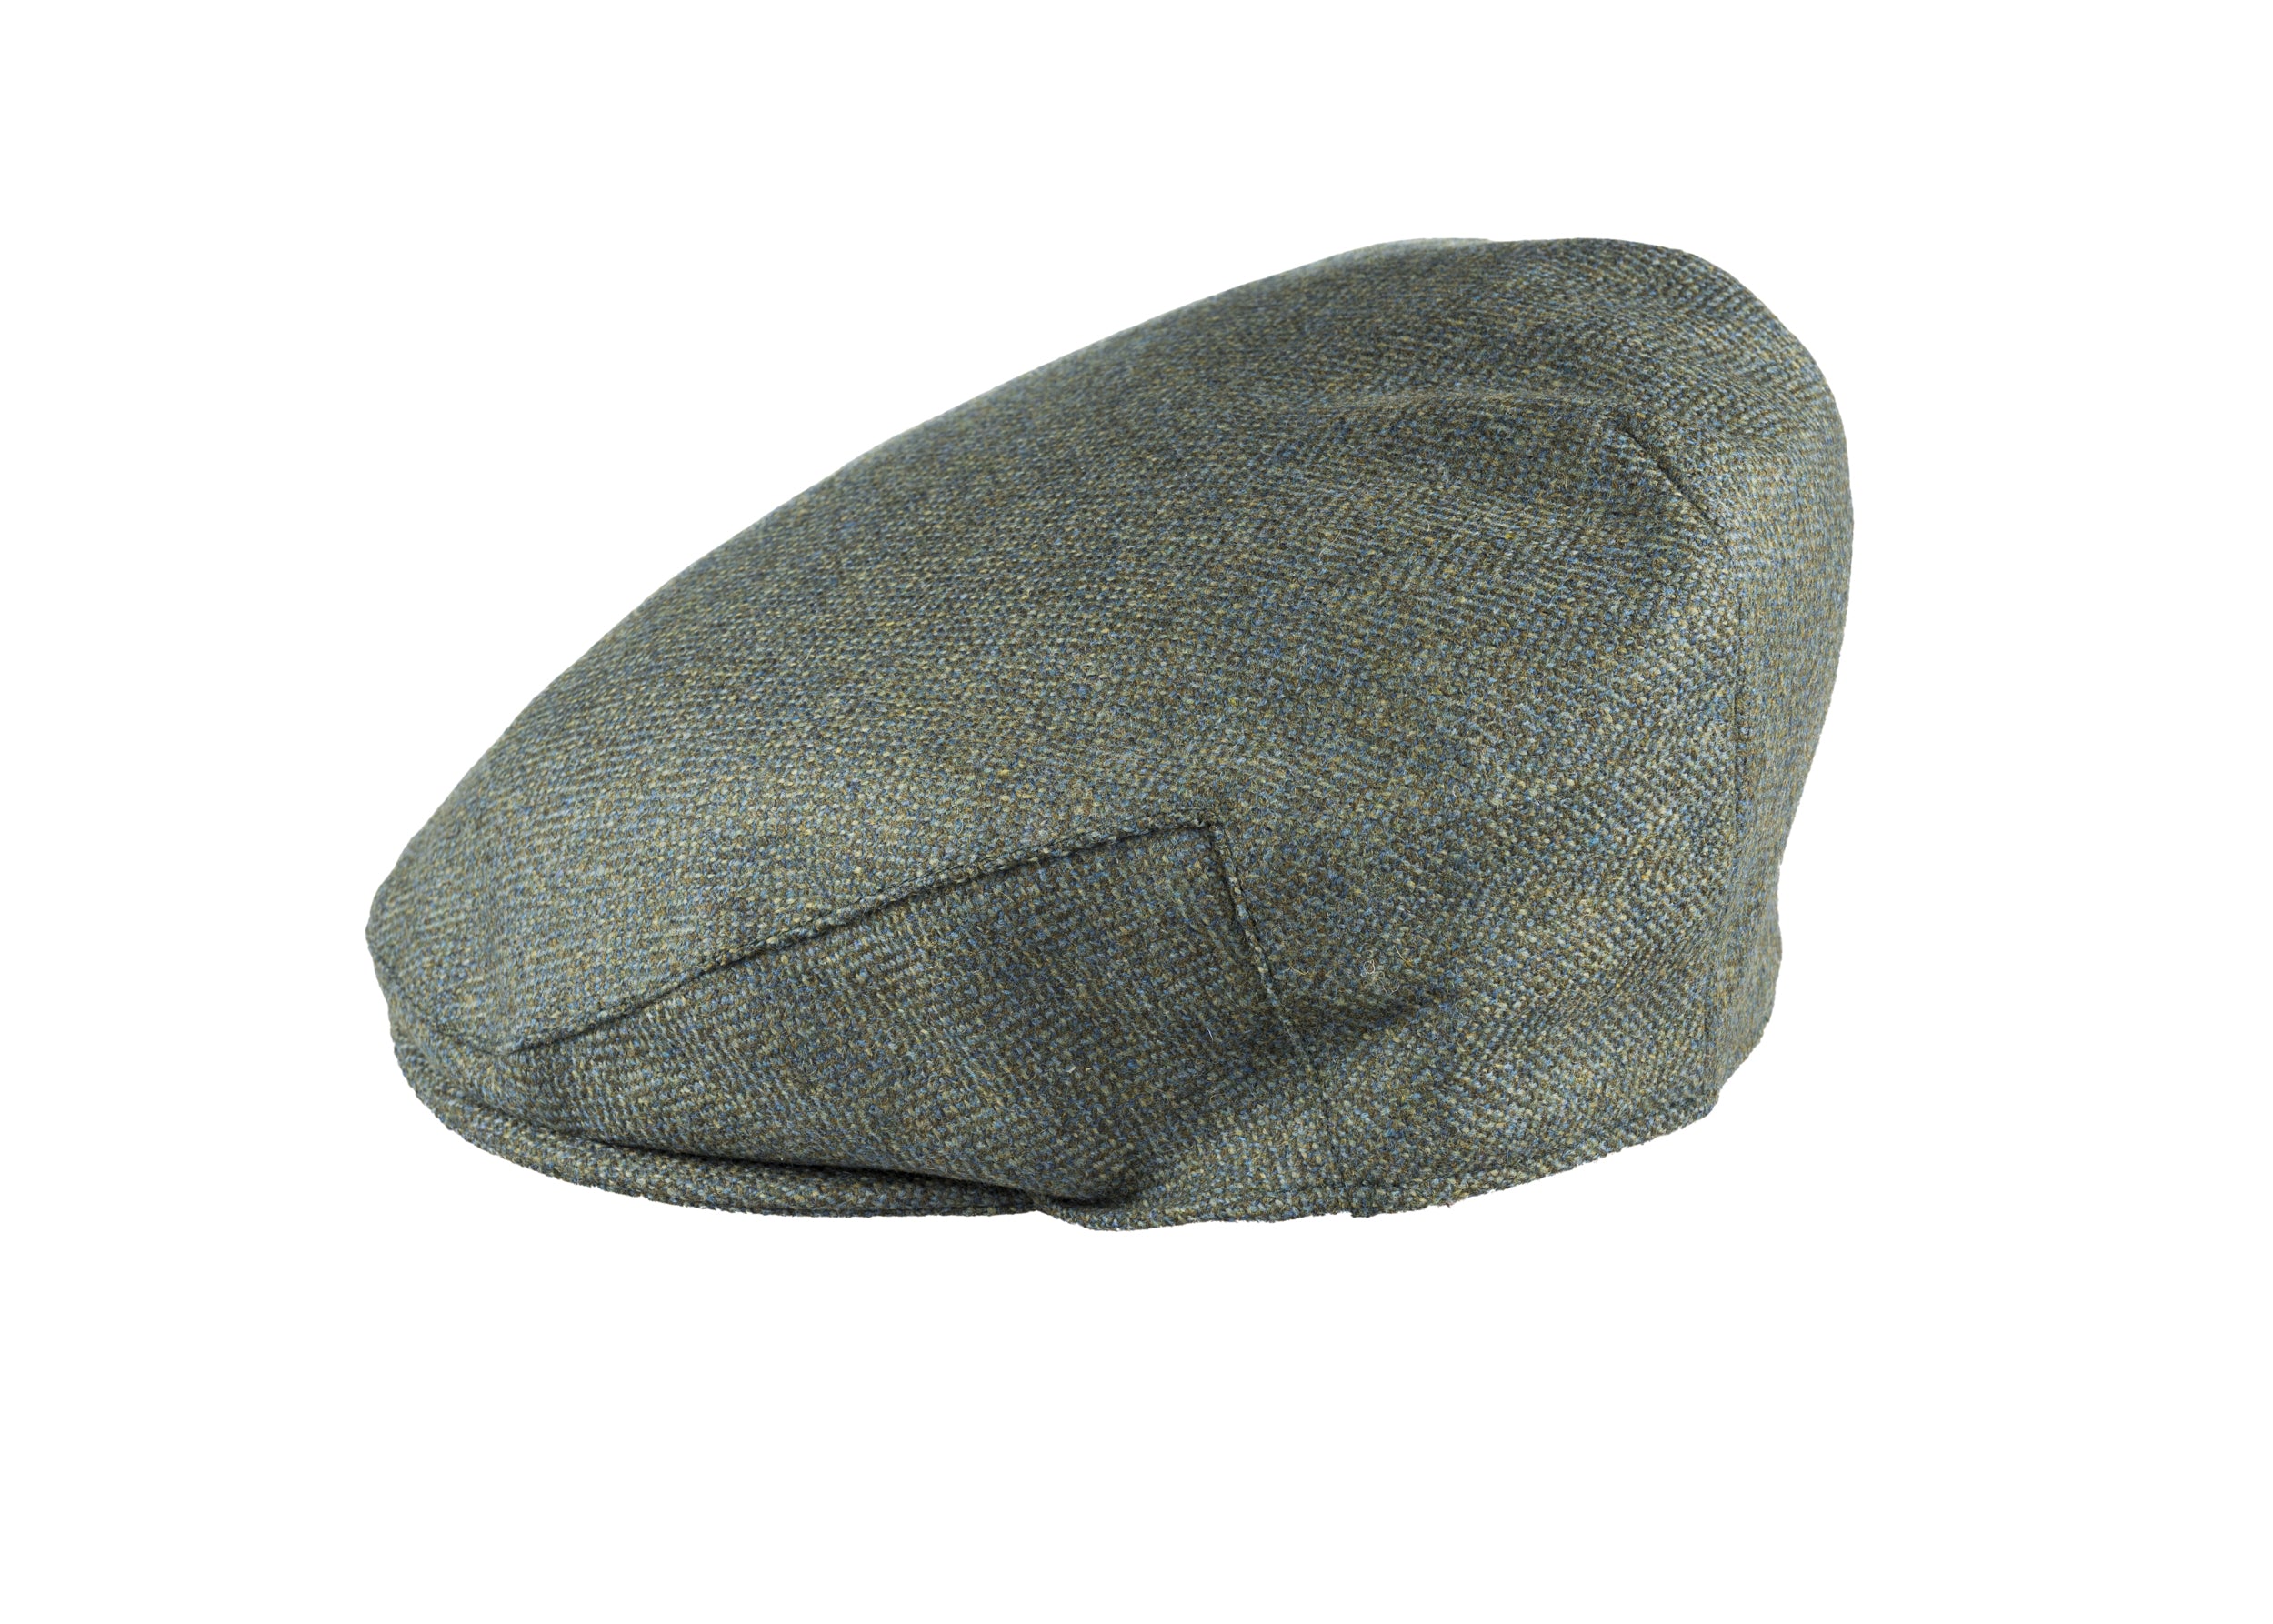 Lovat Mill Teviot Tweed Made in England Balmoral Cap in Thistle